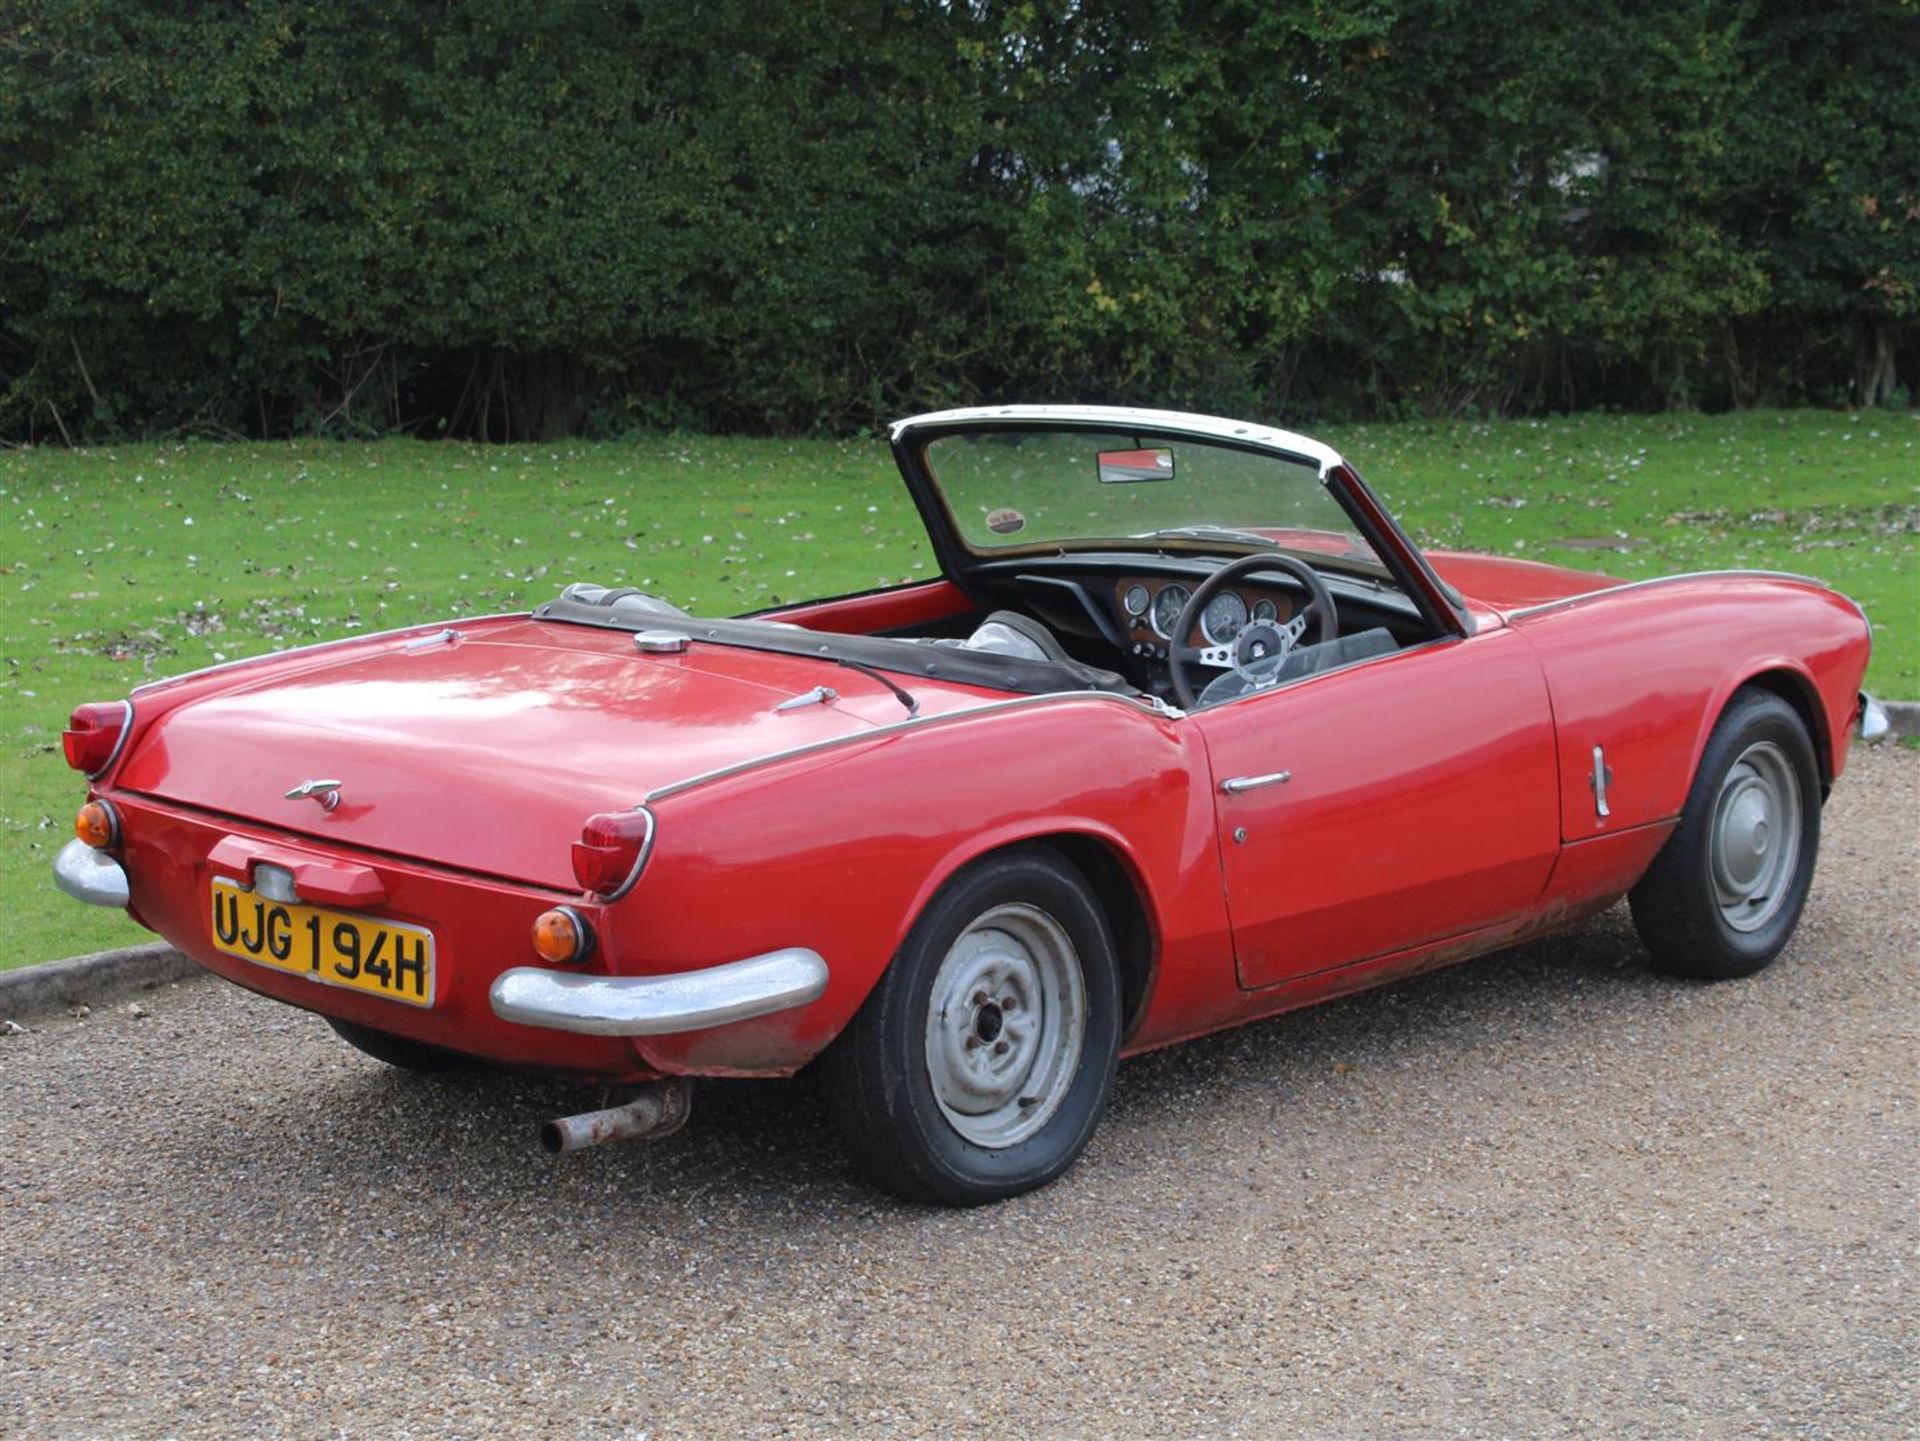 1970 Triumph Spitfire MKIII - Image 2 of 15